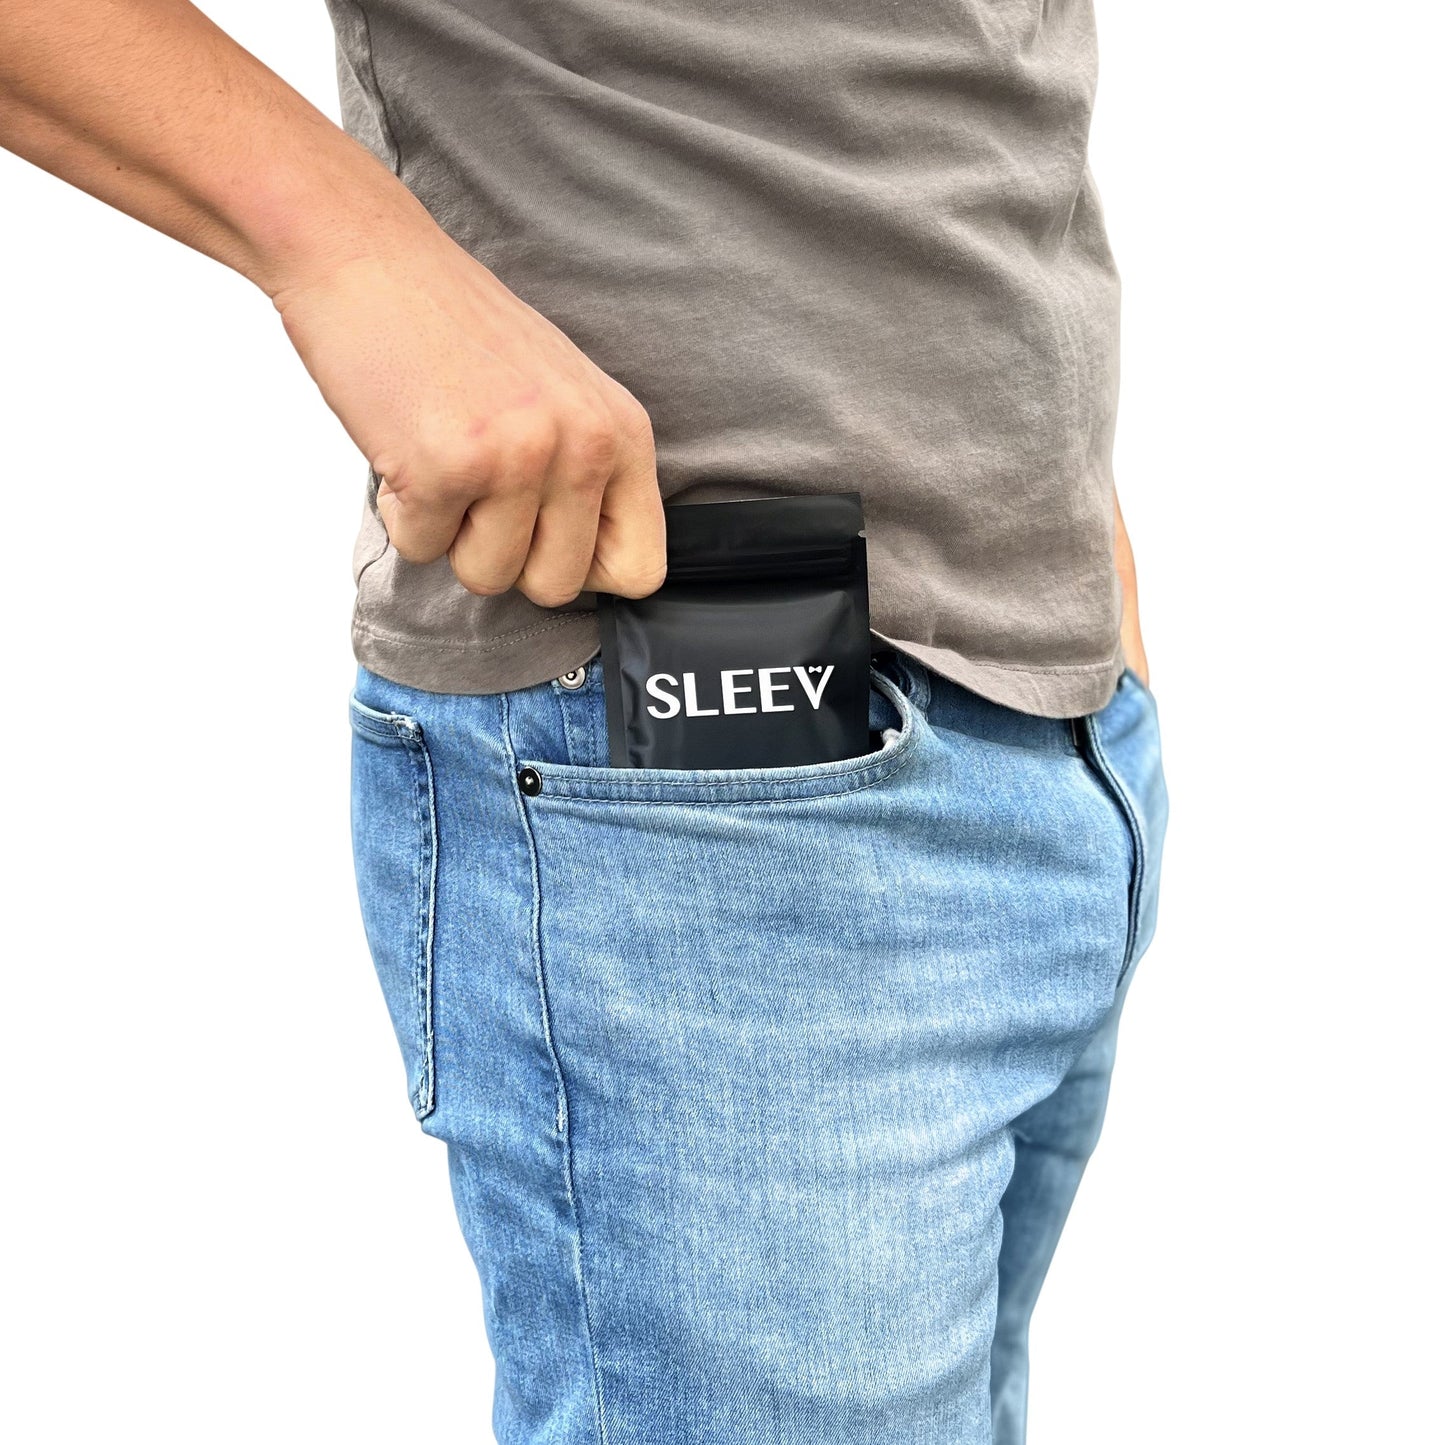 Men carrying masturbation sleeve pouch in pocket